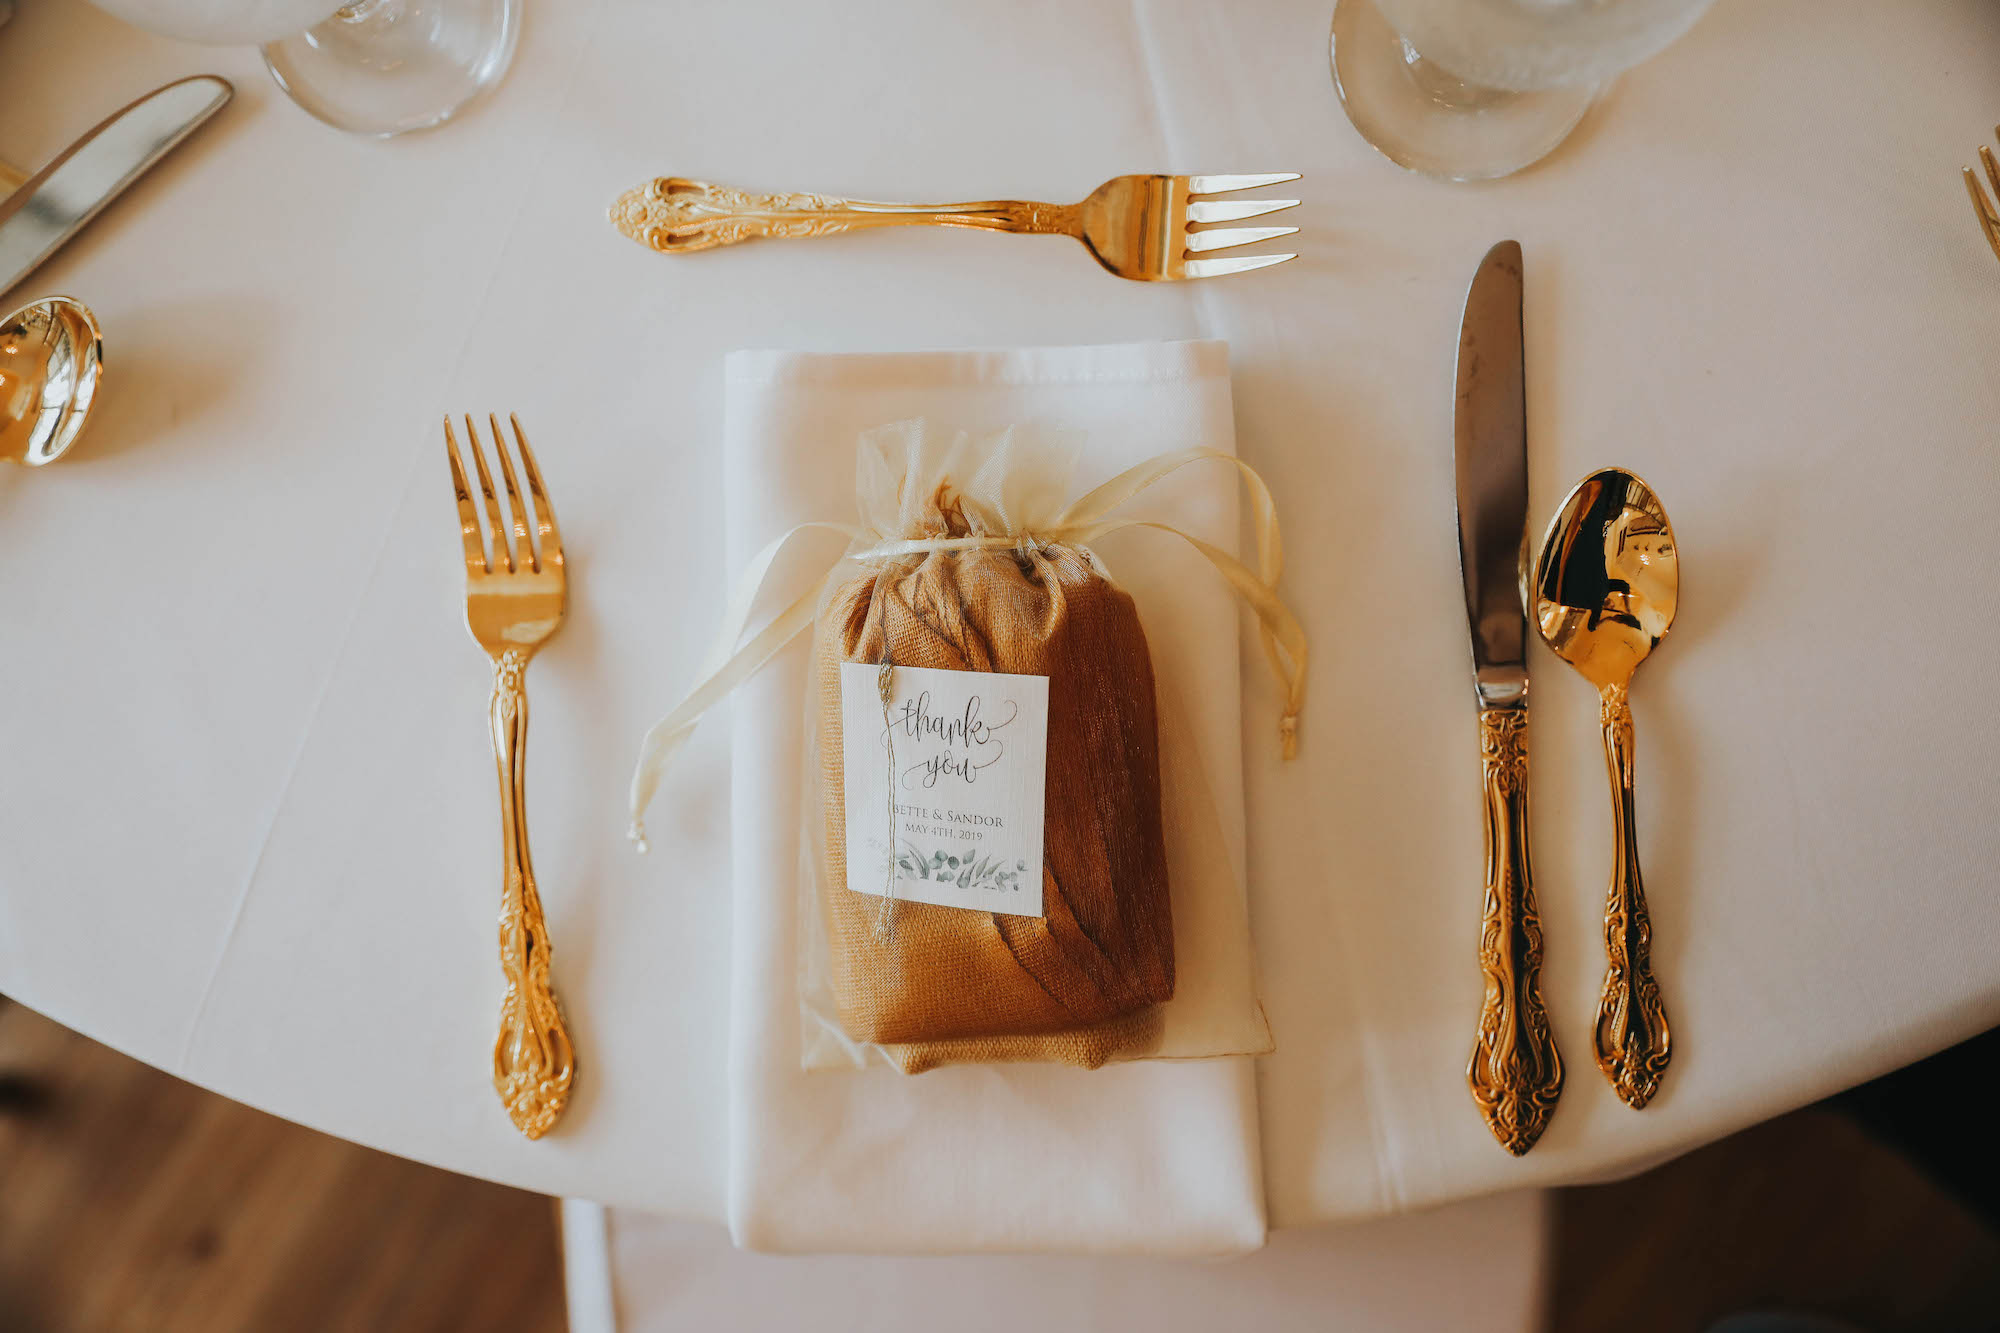 Elegant, Classic Inspired Wedding Decor at Reception, Thank You Gift at Place Seating, Gold Flatware | Tampa Bay Wedding Decor and Rentals Outside The Box Event Rentals